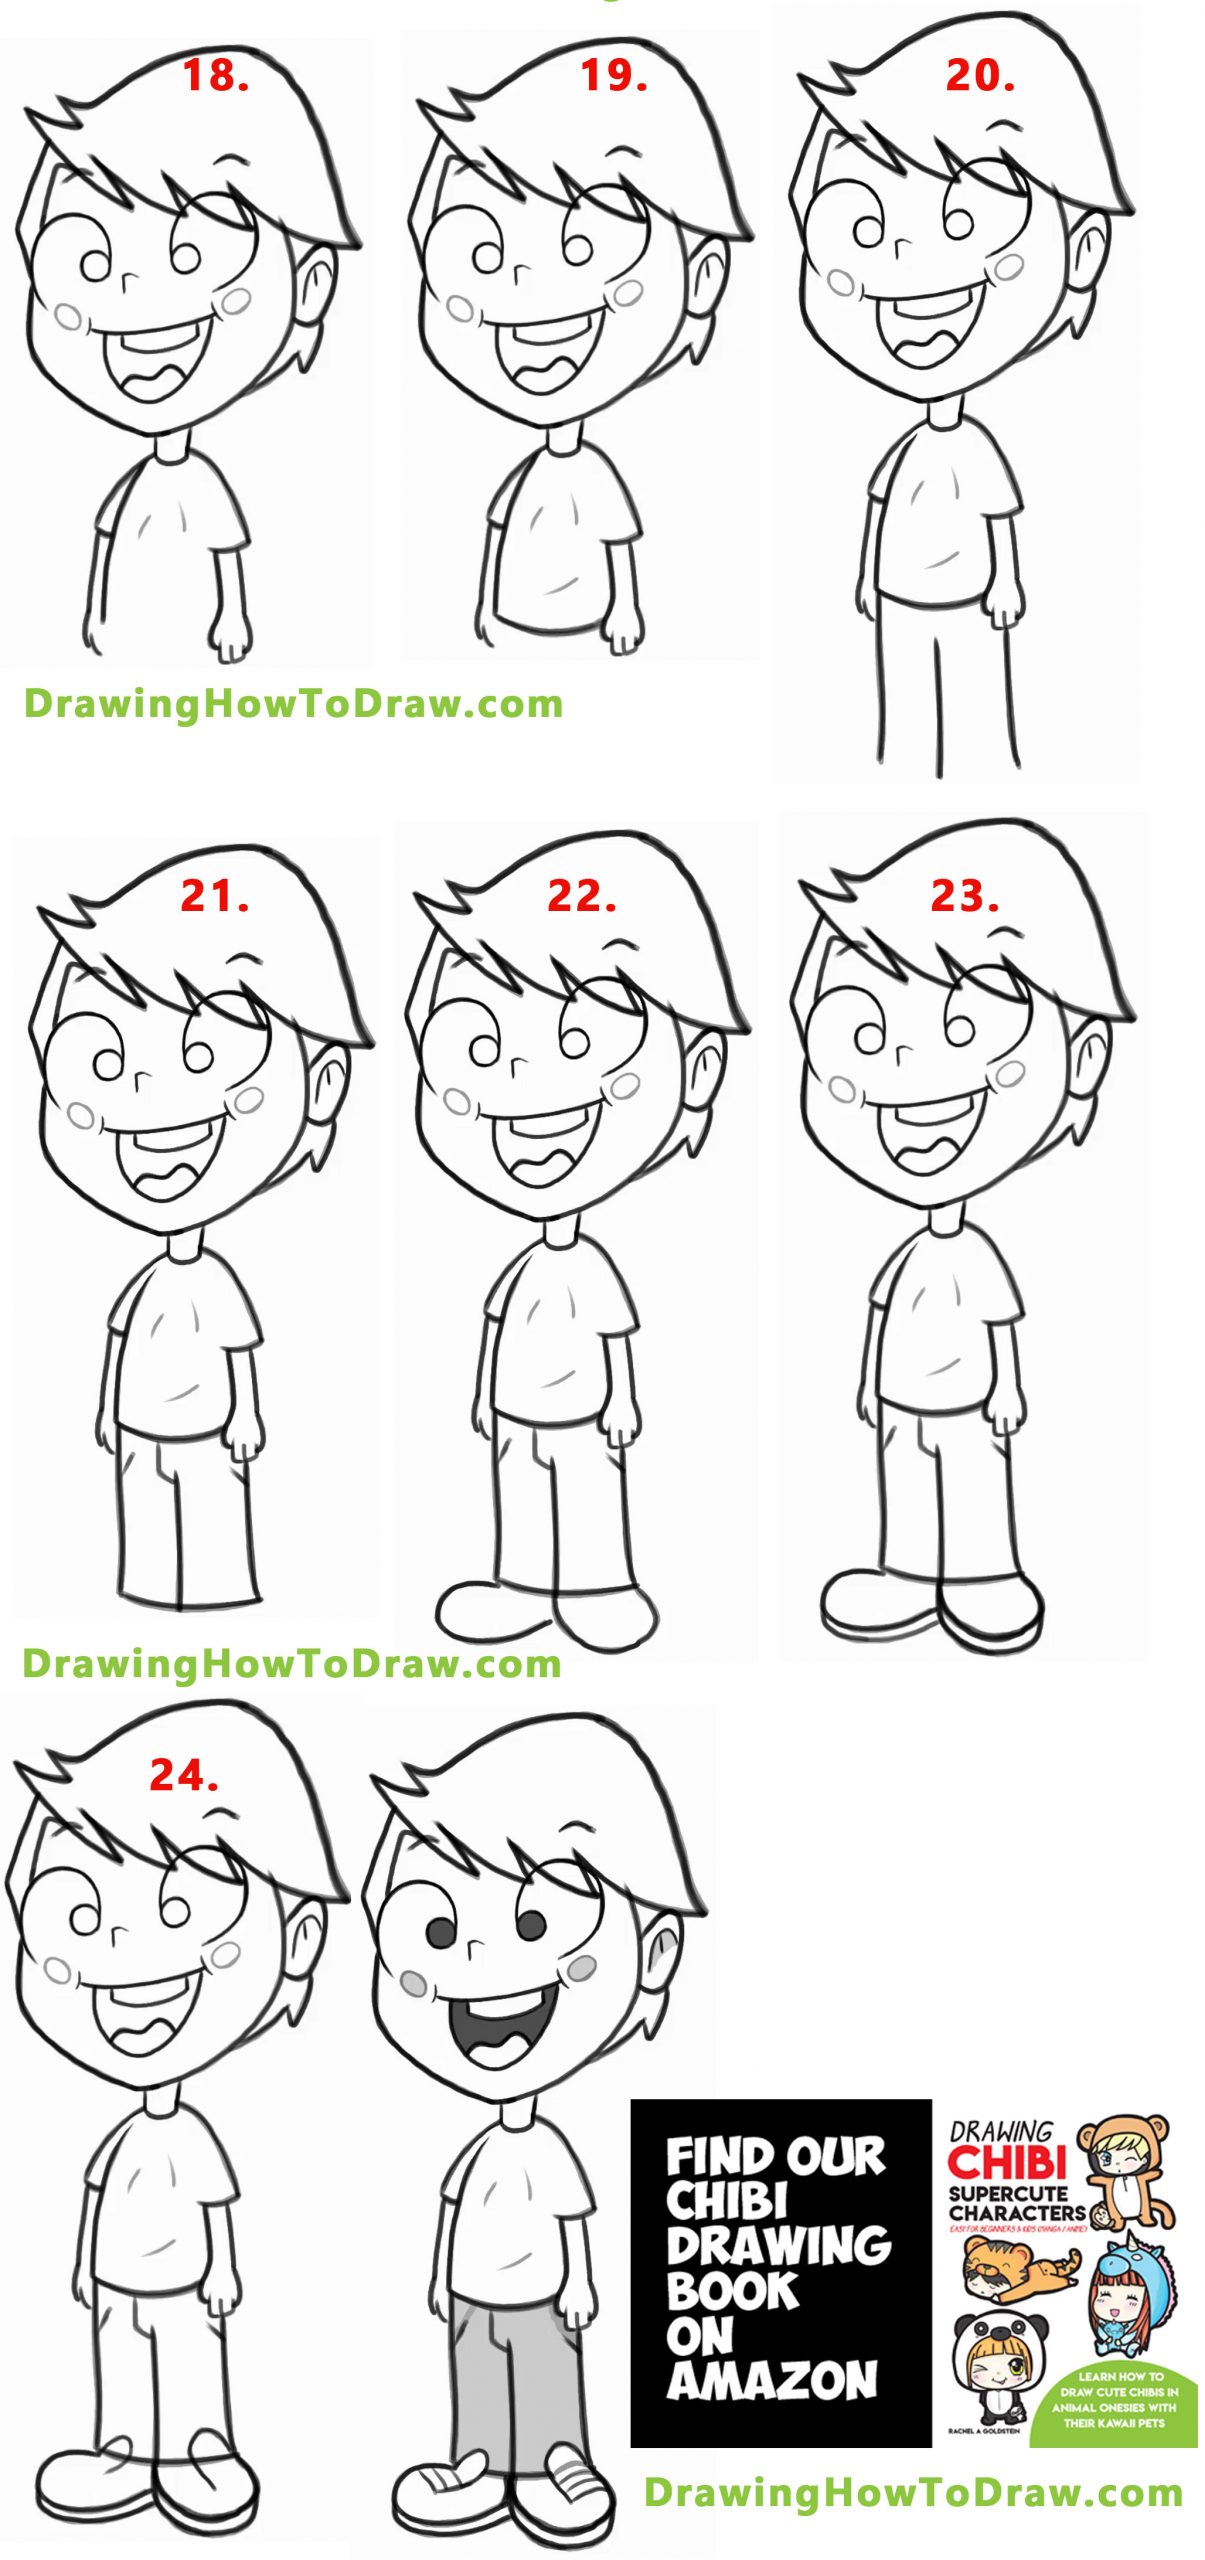 How To Draw A Cartoon Step By Step